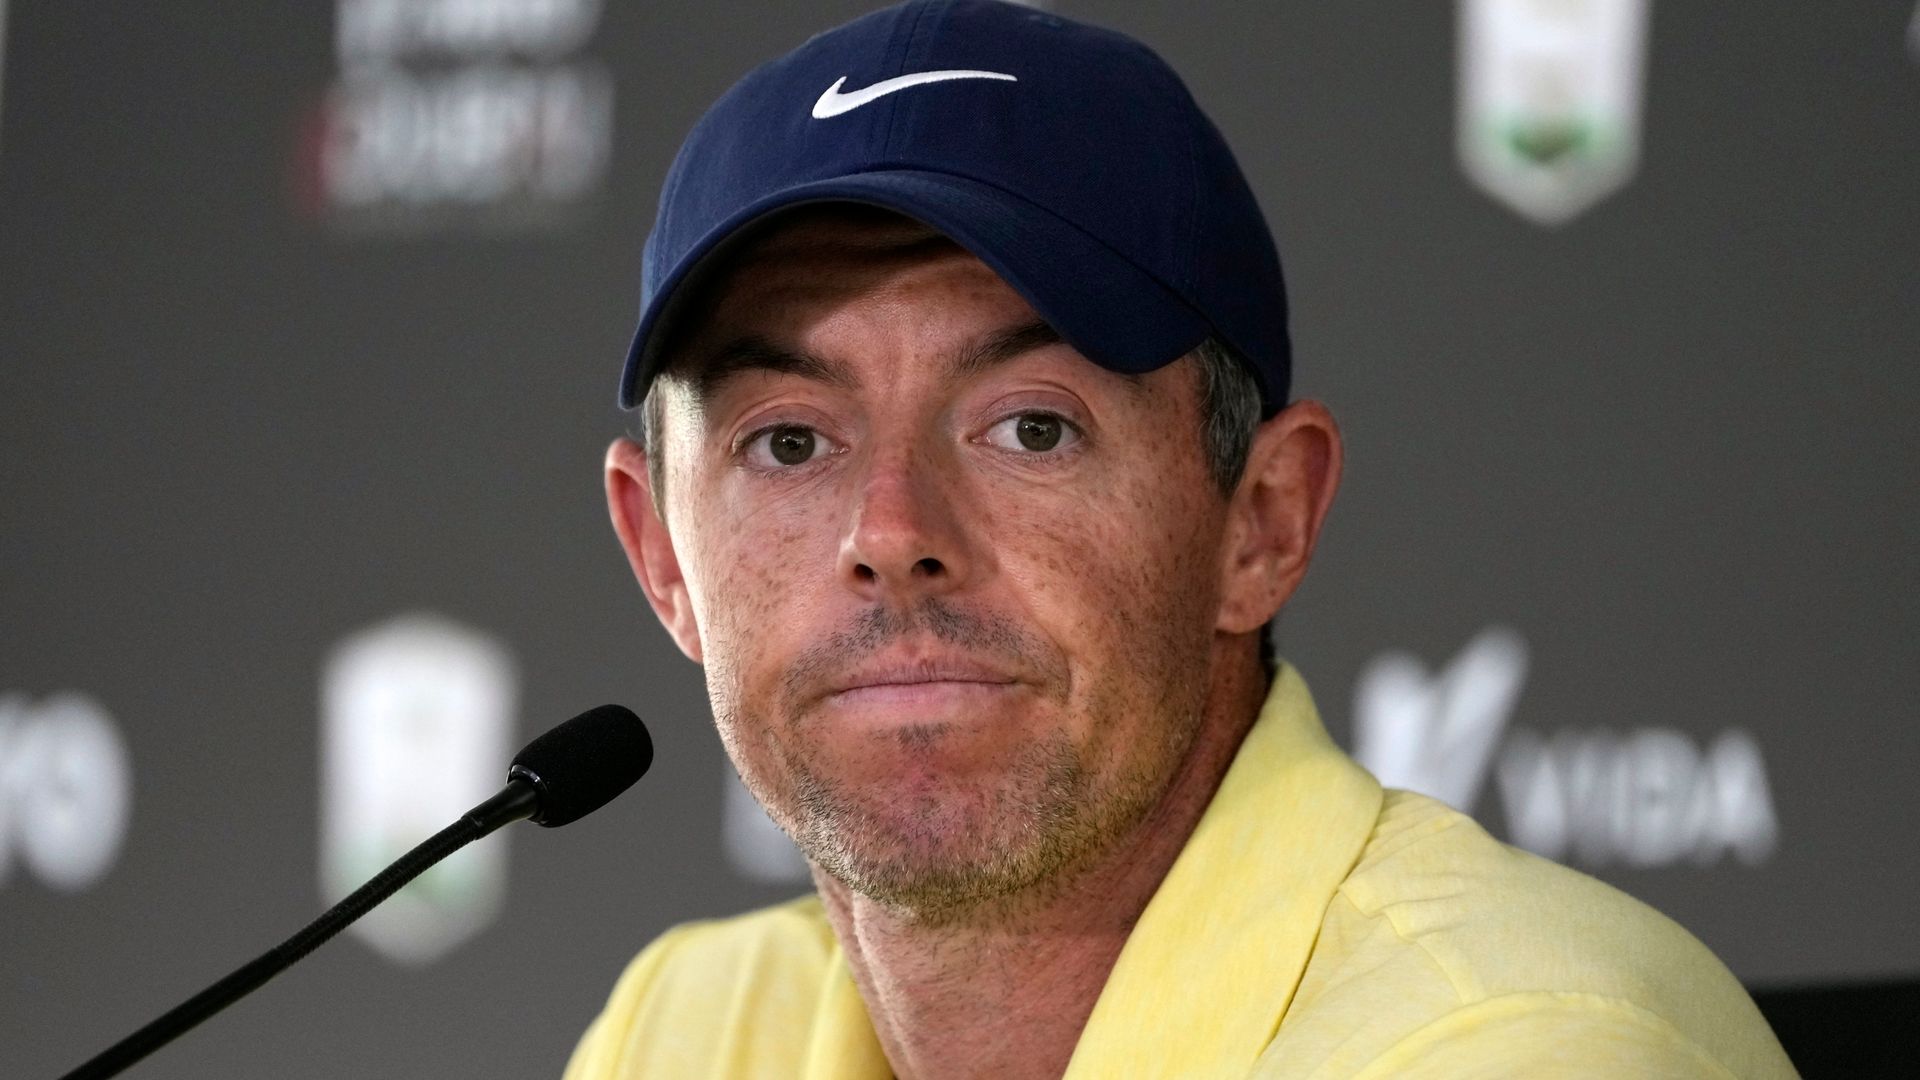 McIlroy hopes for Champions League-style golf landscape if deal agreed